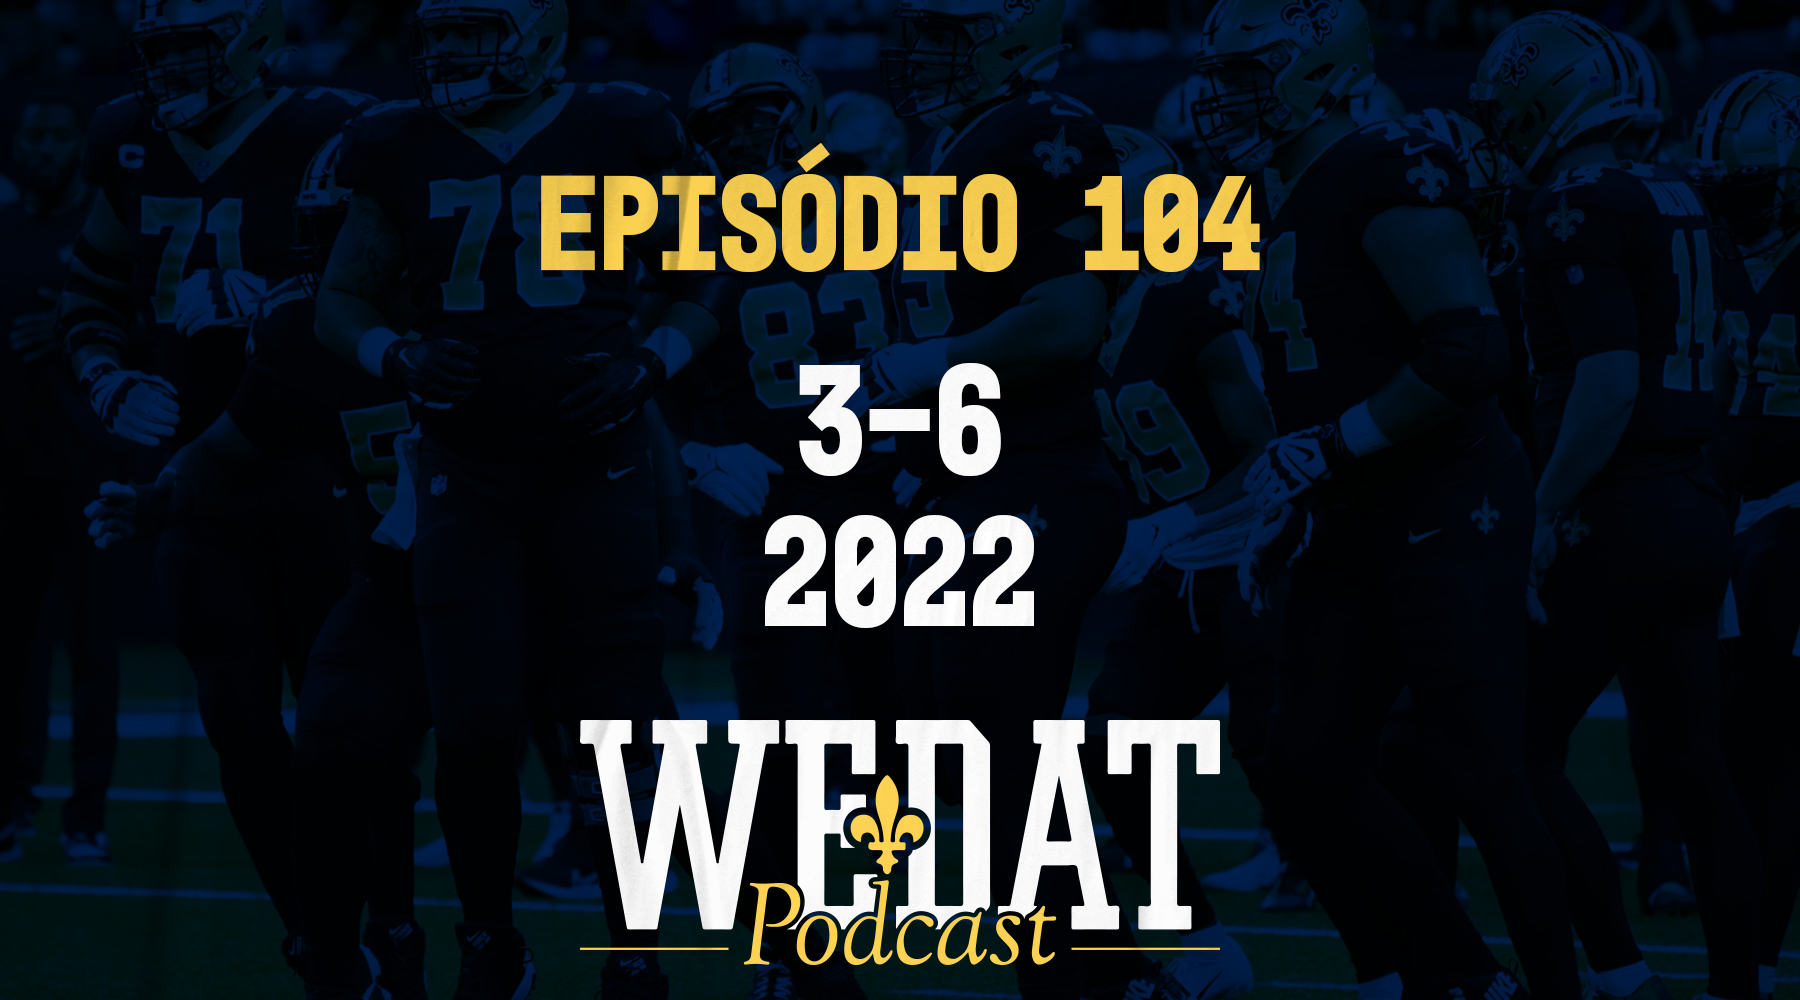 We Dat Podcast #104 – 3-6|2022